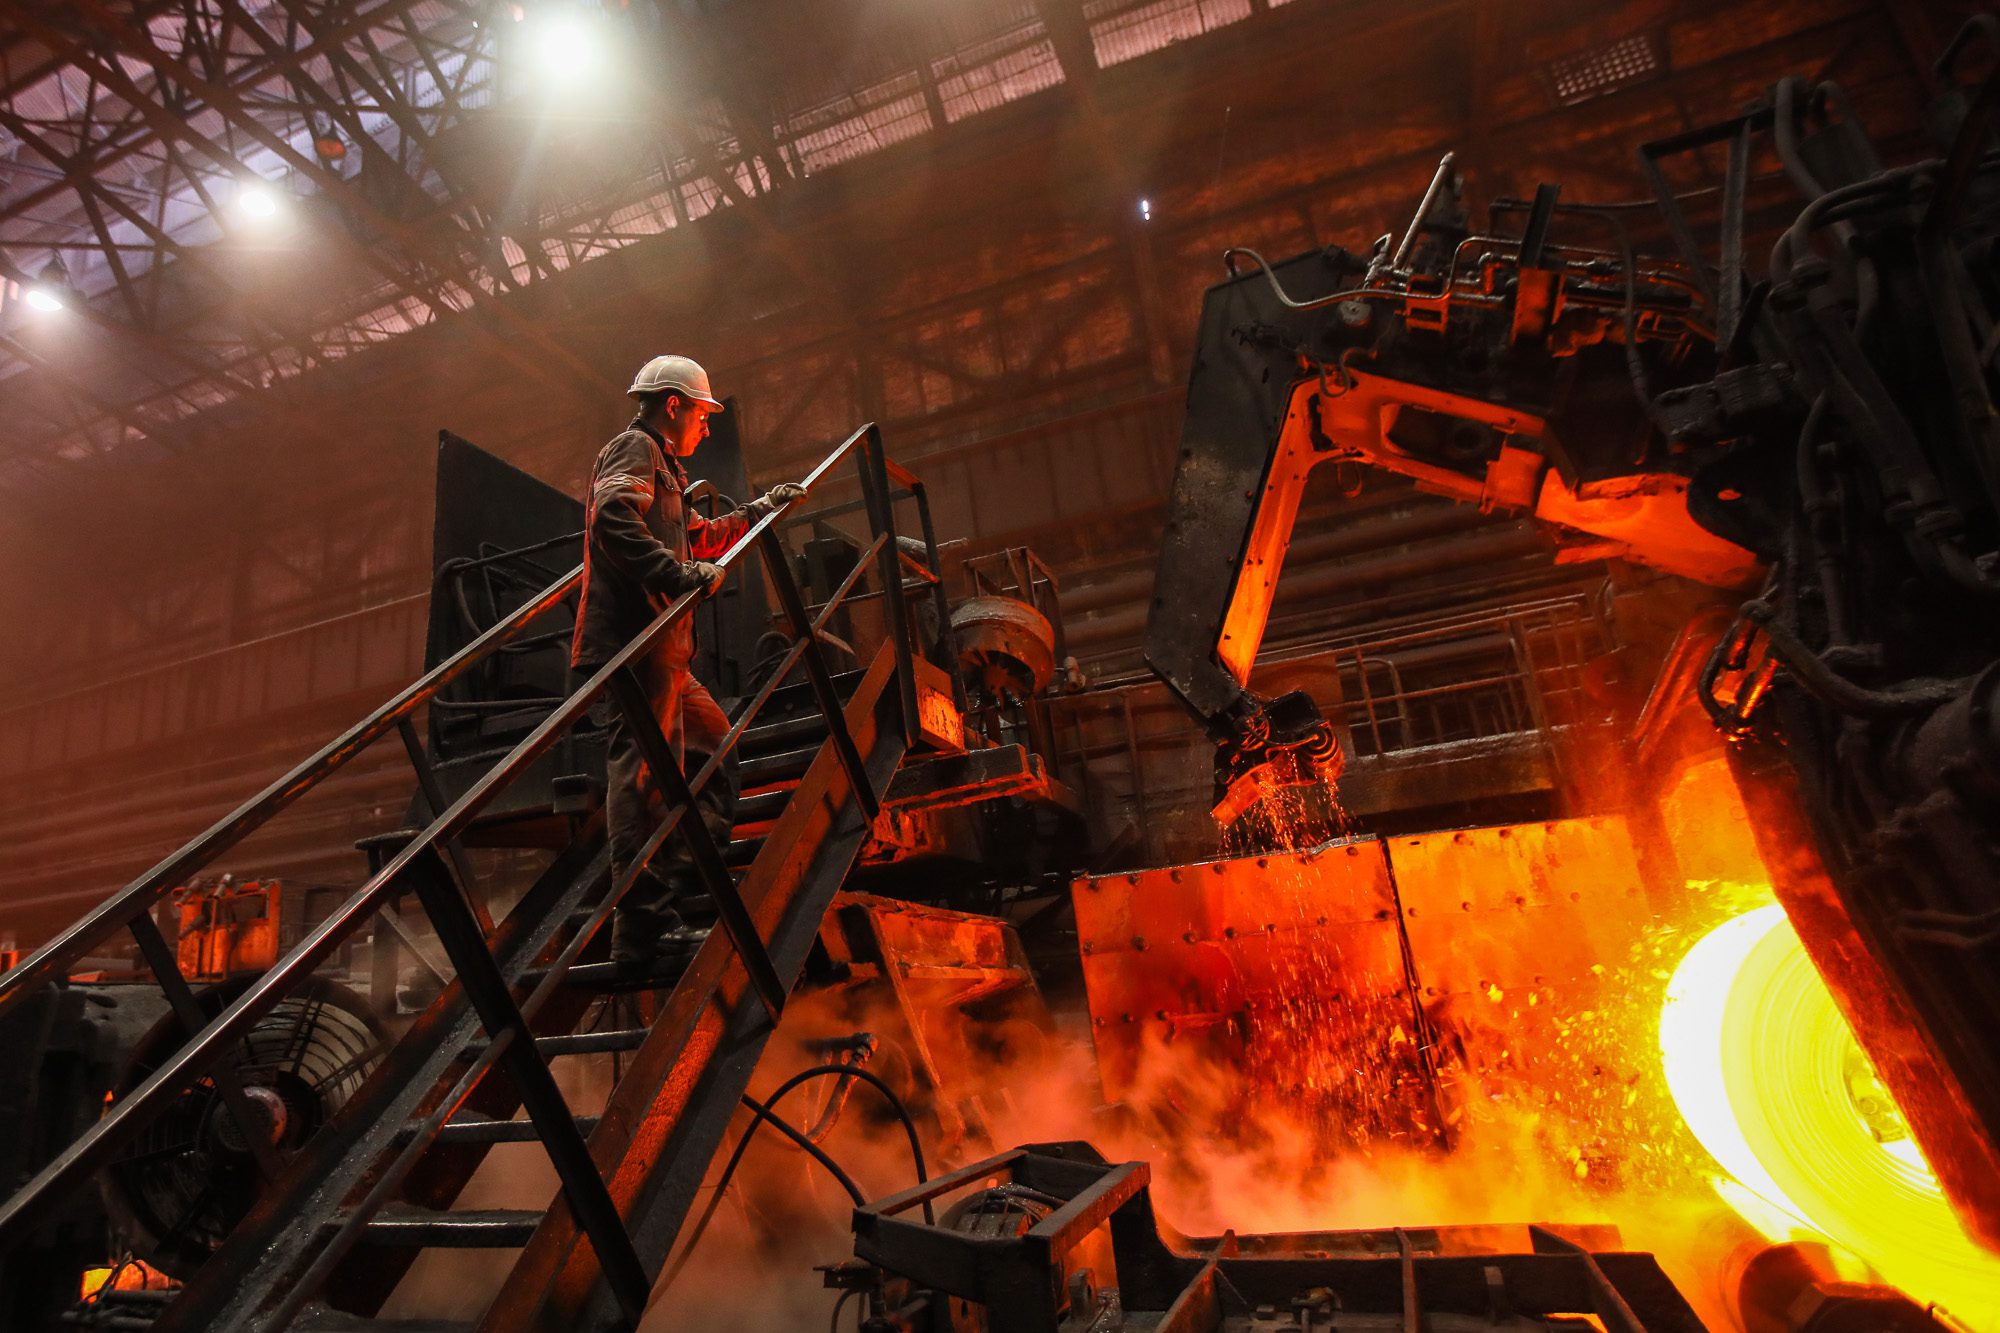 UKRAINE CLIMBS TO 13TH PLACE IN WORLDSTEEL RATING OF